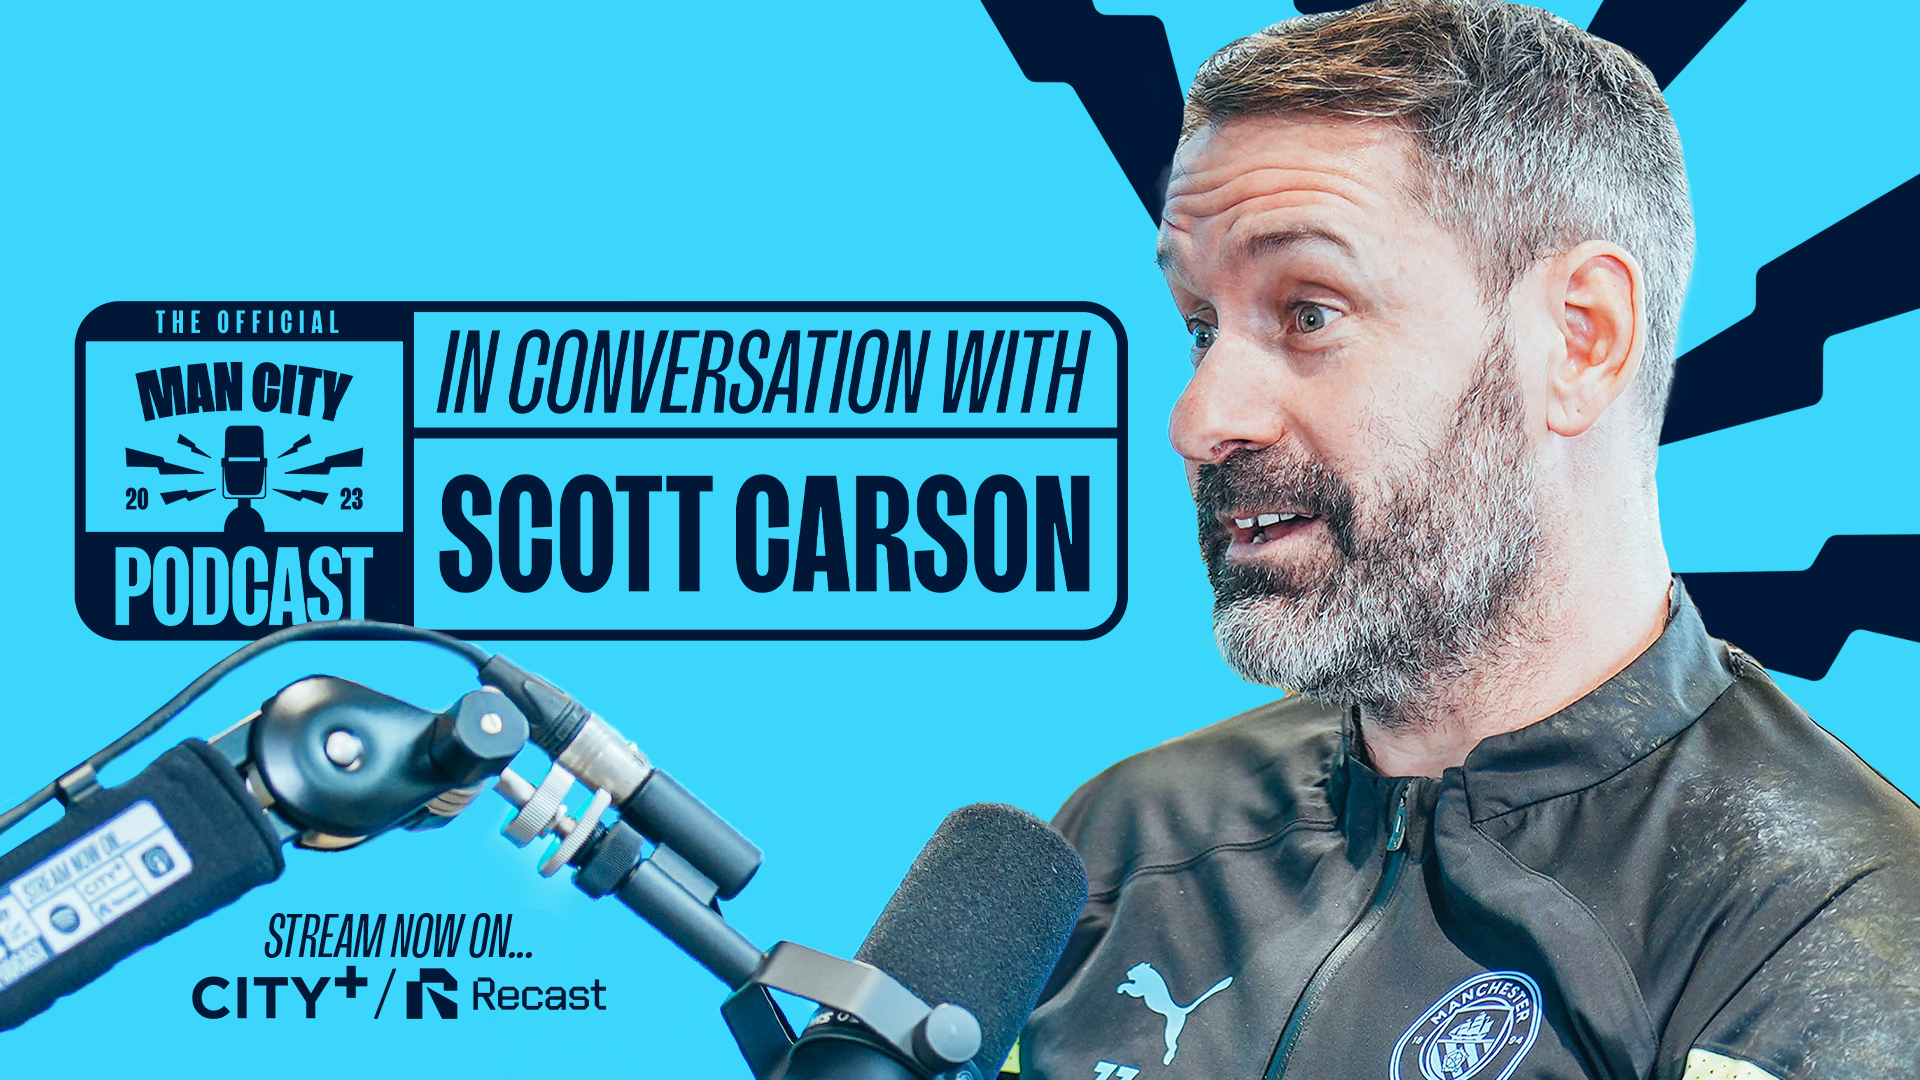 In conversation with Scott Carson | Man City Podcast